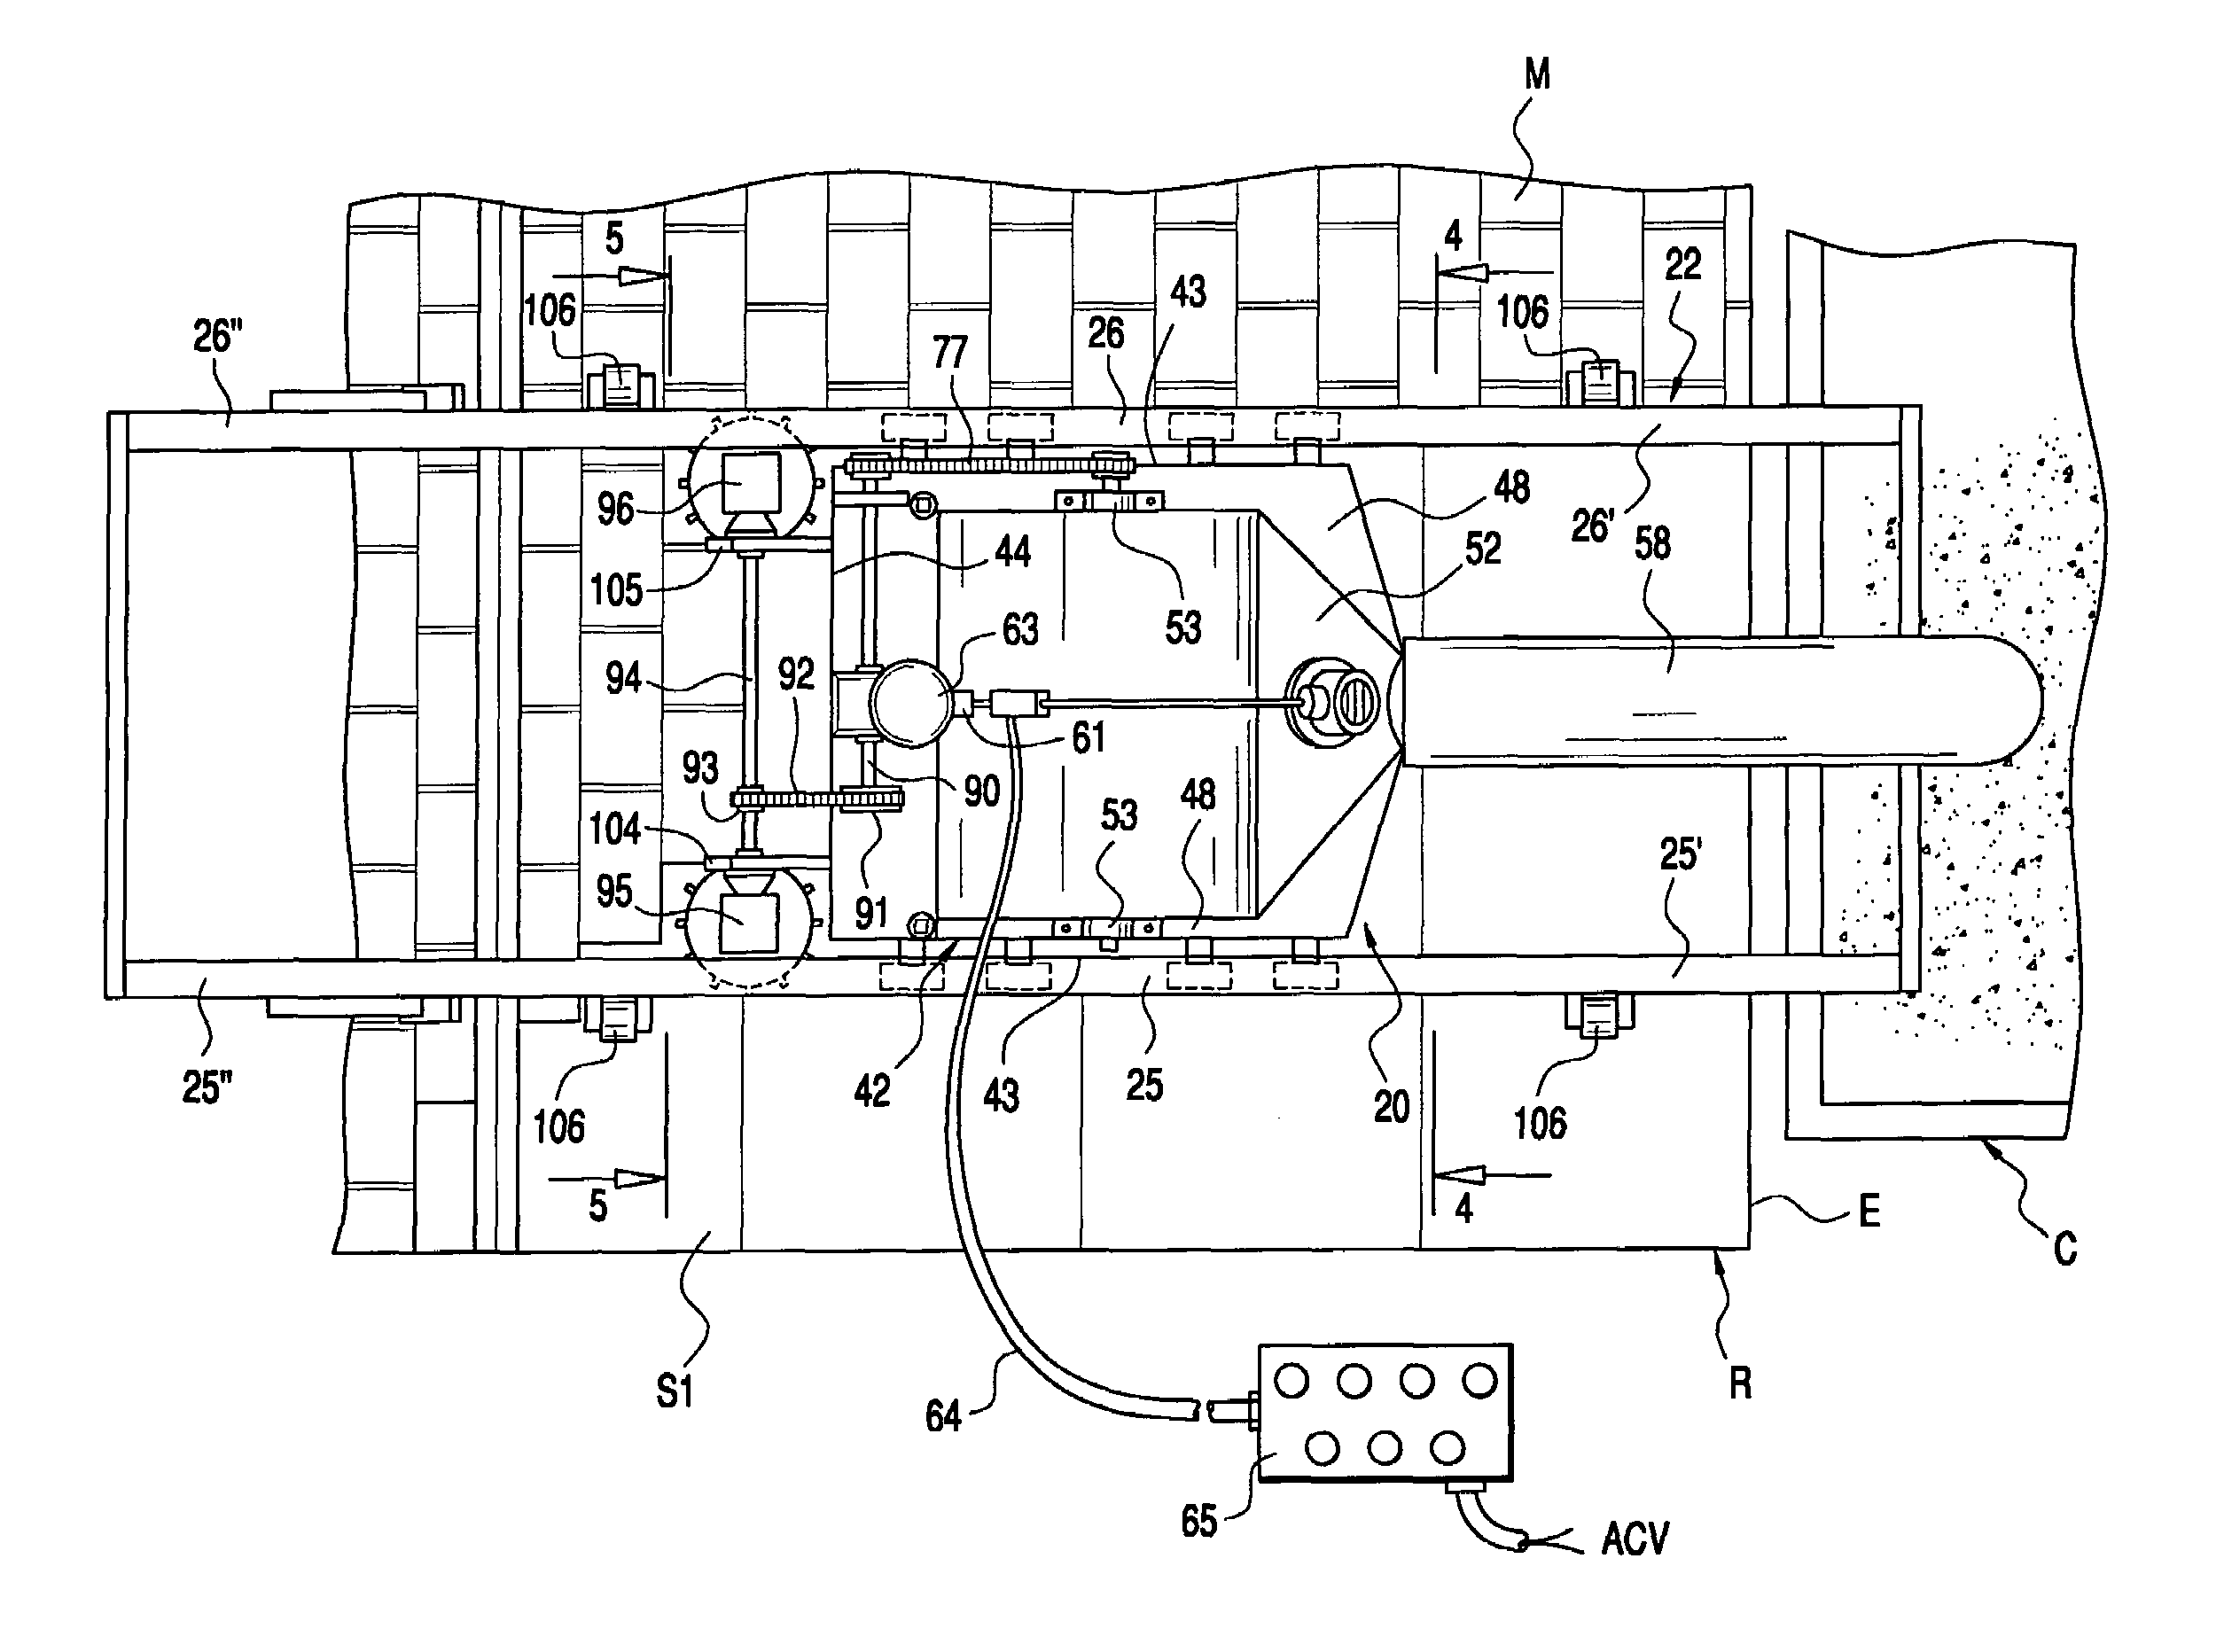 Automated roofing material removal machine and method